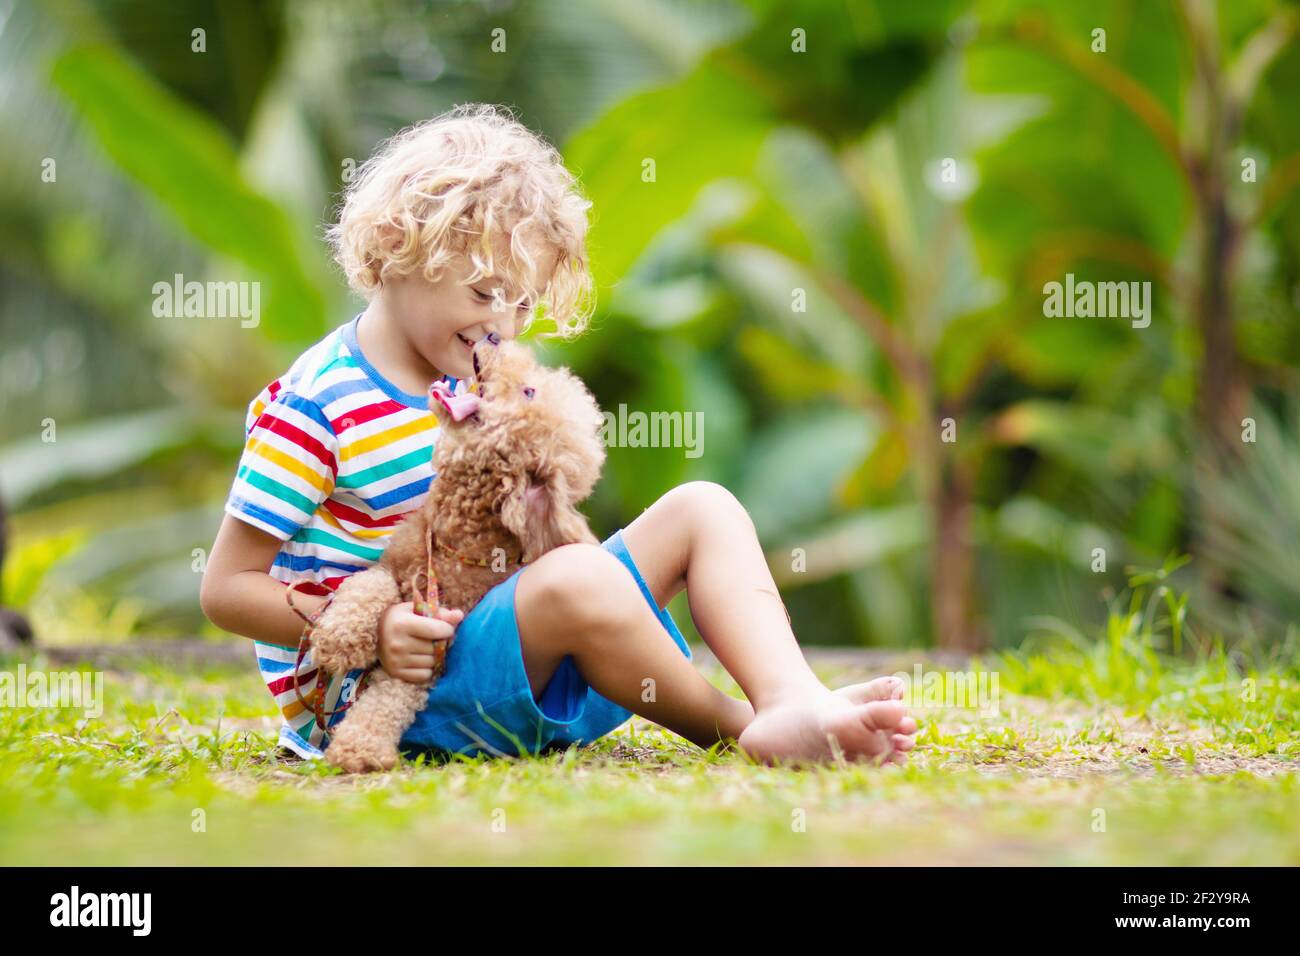 Kids play with cute little puppy. Children and baby dog playing in sunny summer garden. Little boy holding puppies. Child with pet. Stock Photo